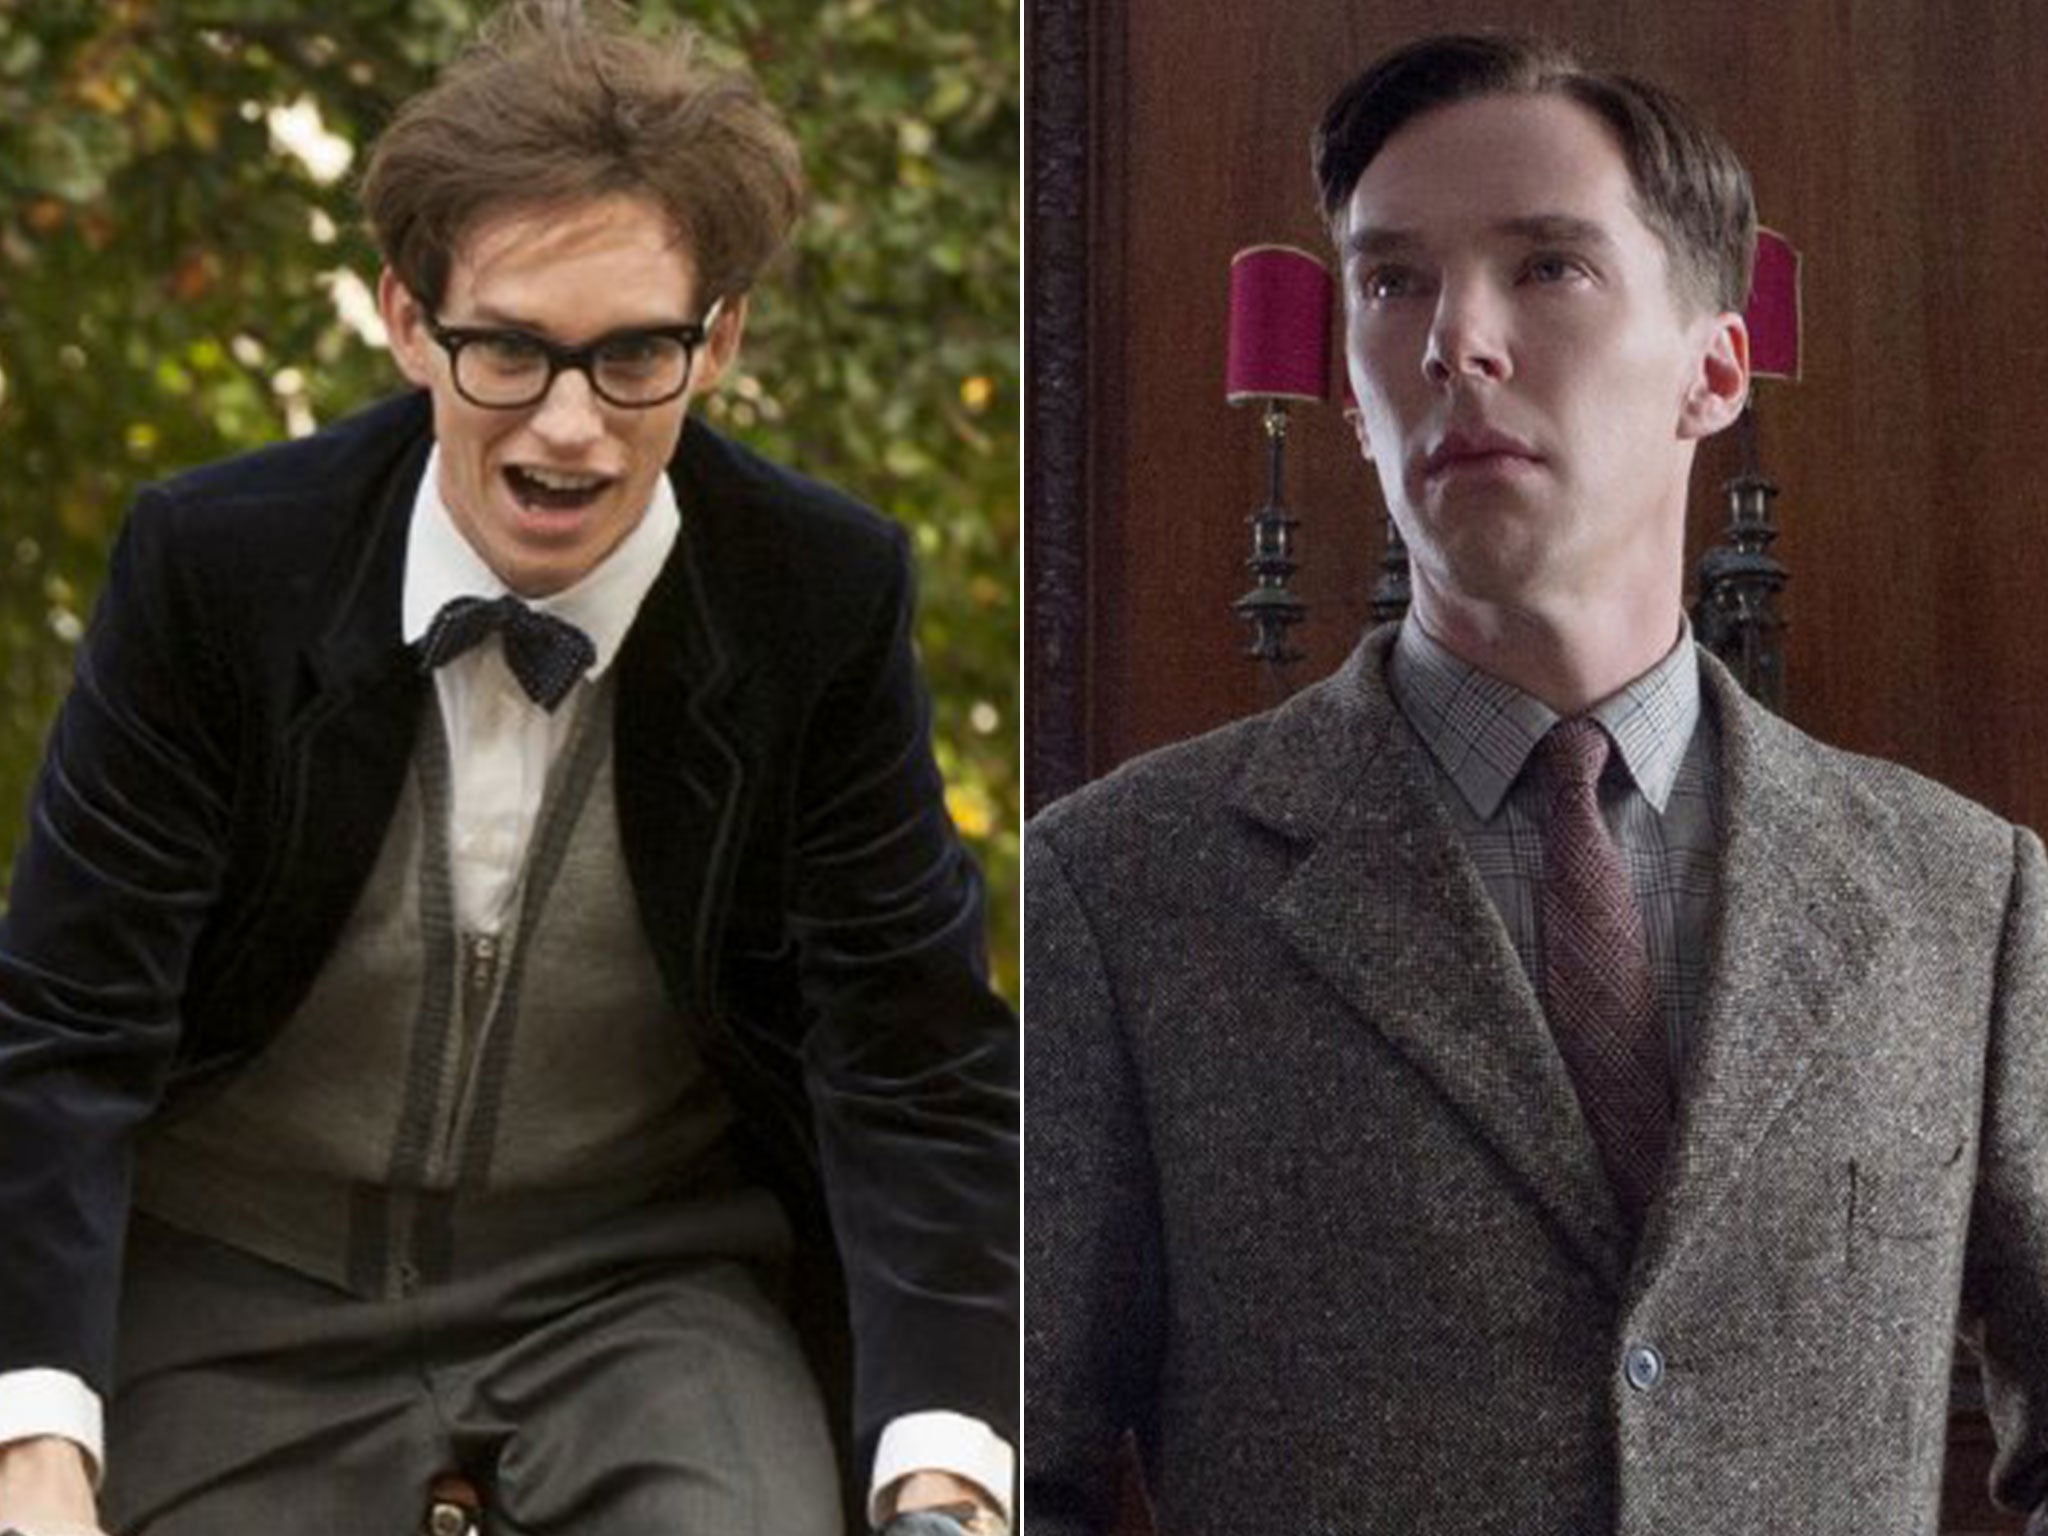 Eddie Redmayne in The Theory of Everything and Benedict Cumberbatch in The Imitation Game are both nominated at the Bafta Film Awards